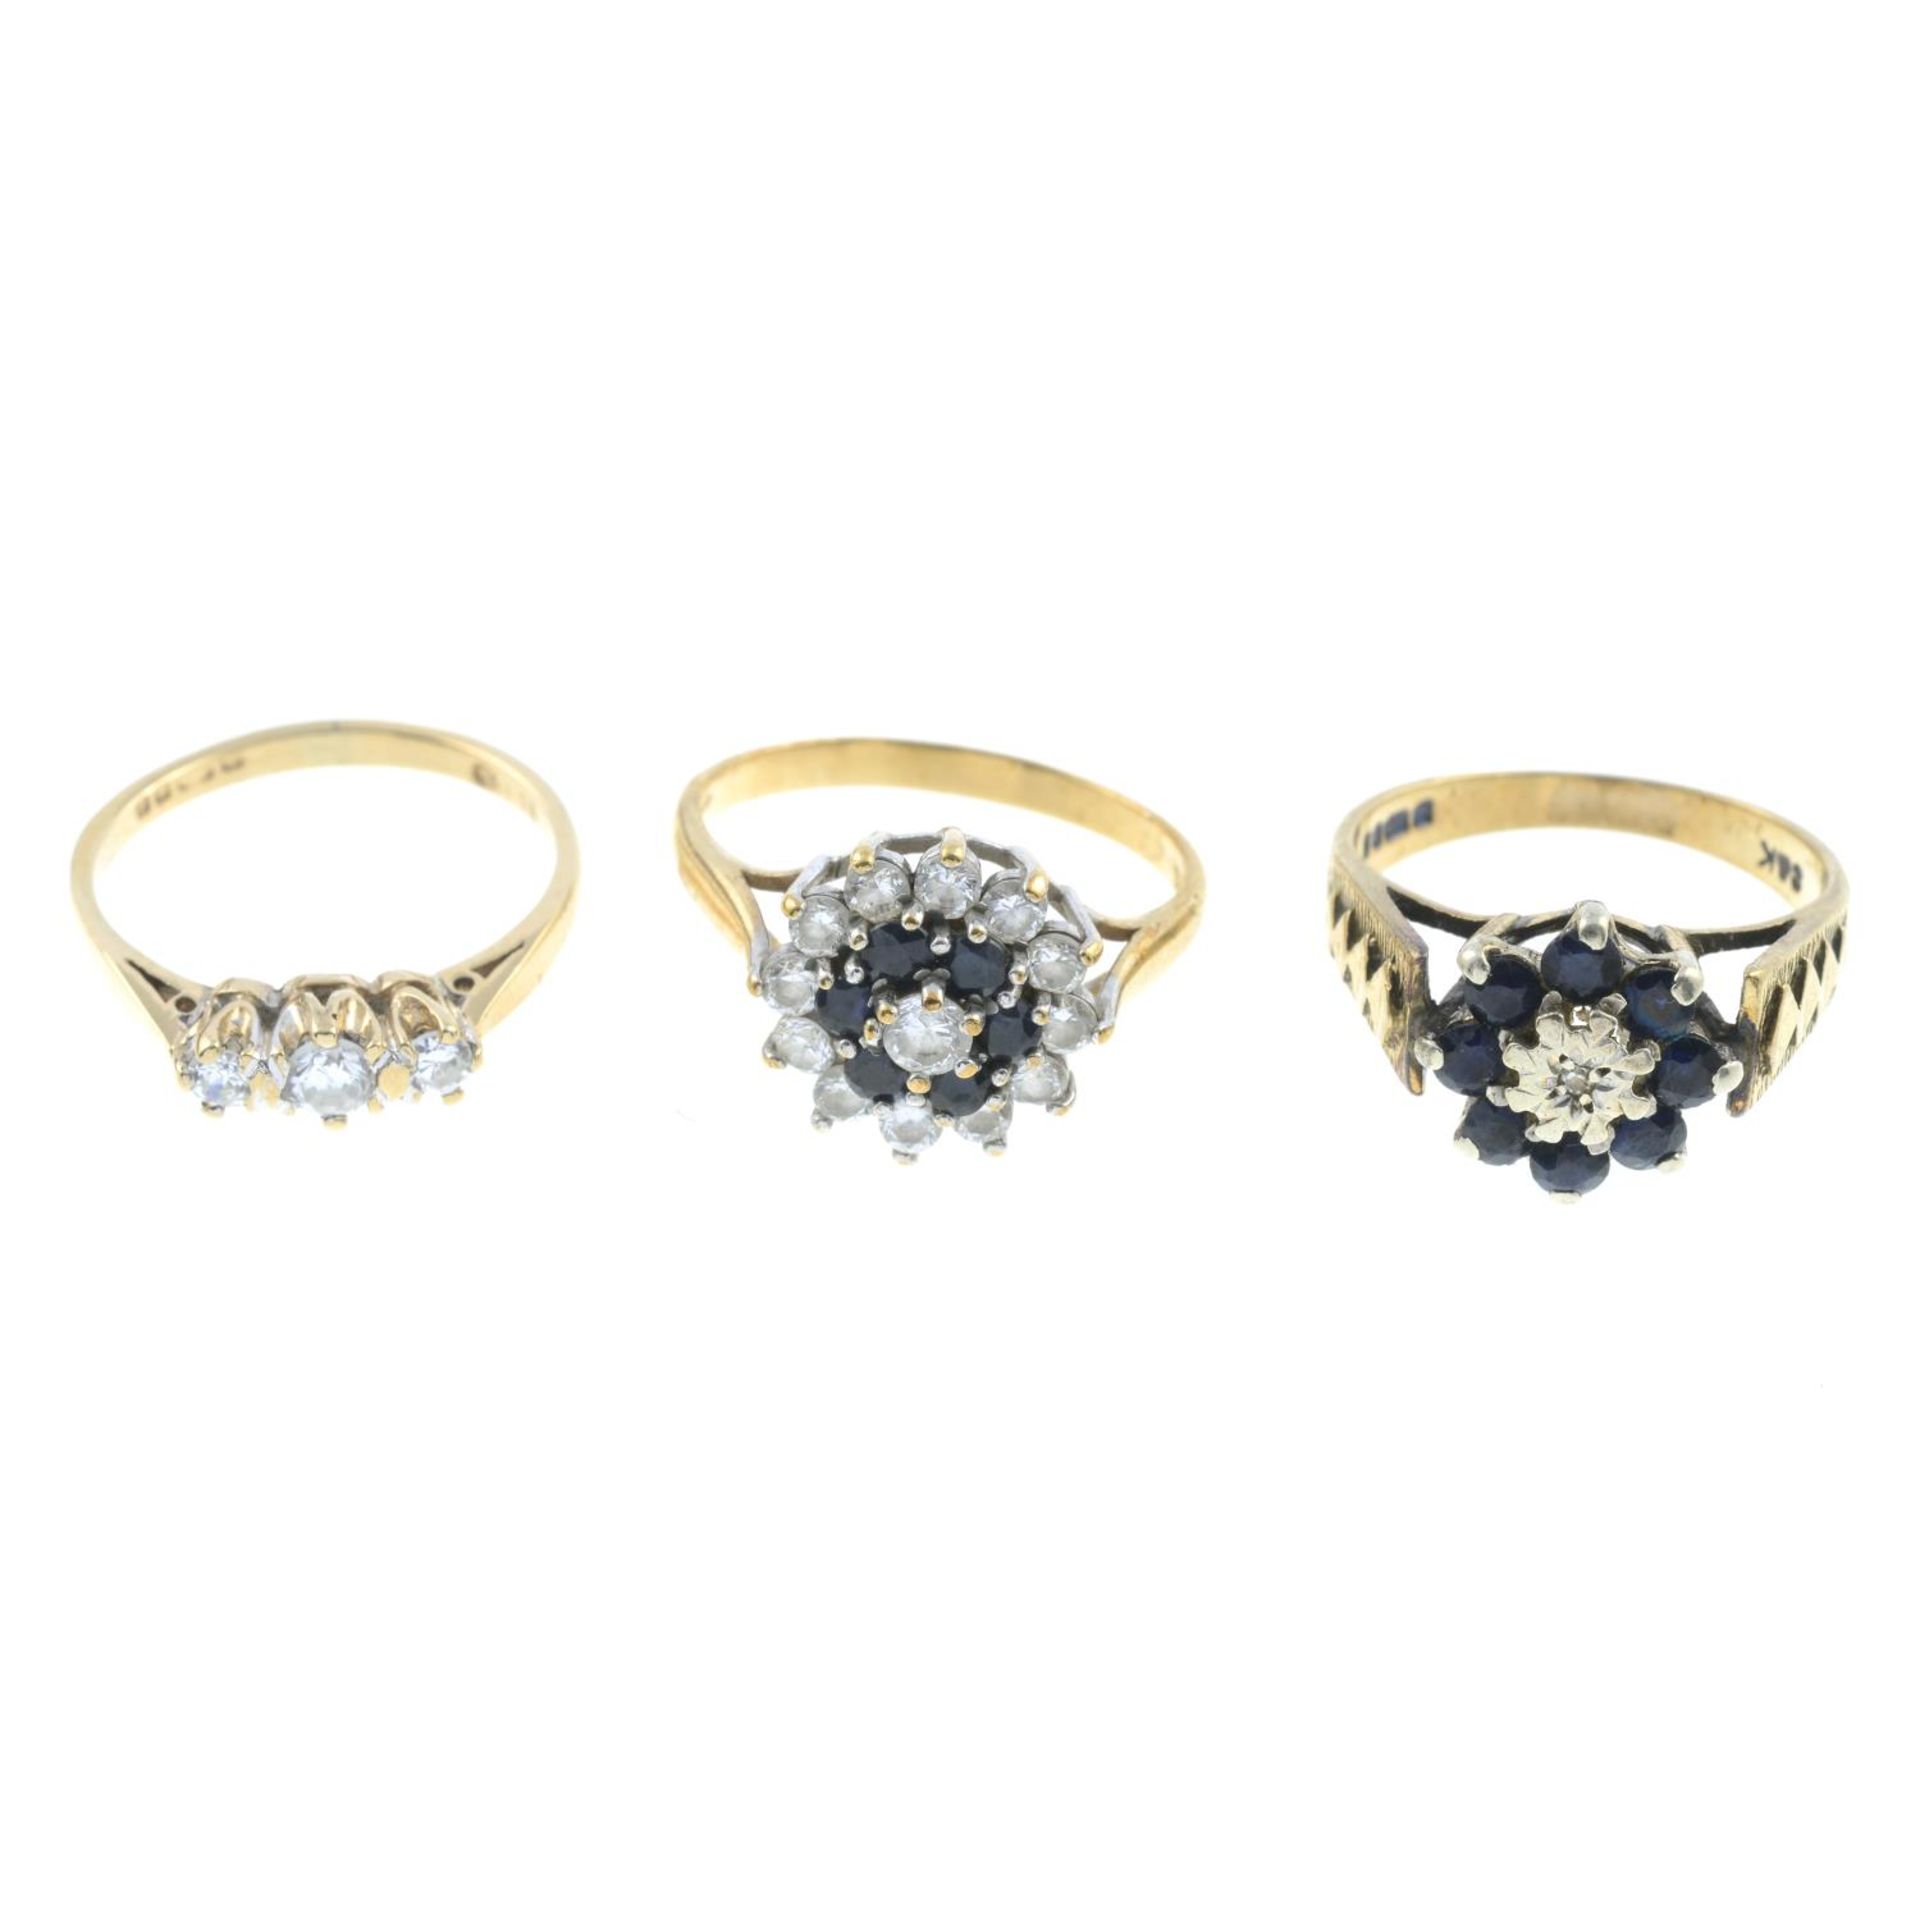 Three 9ct gold cubic zirconia rings, hallmarks for 9ct gold, ring sizes L1/2 to N, 5.4gms.